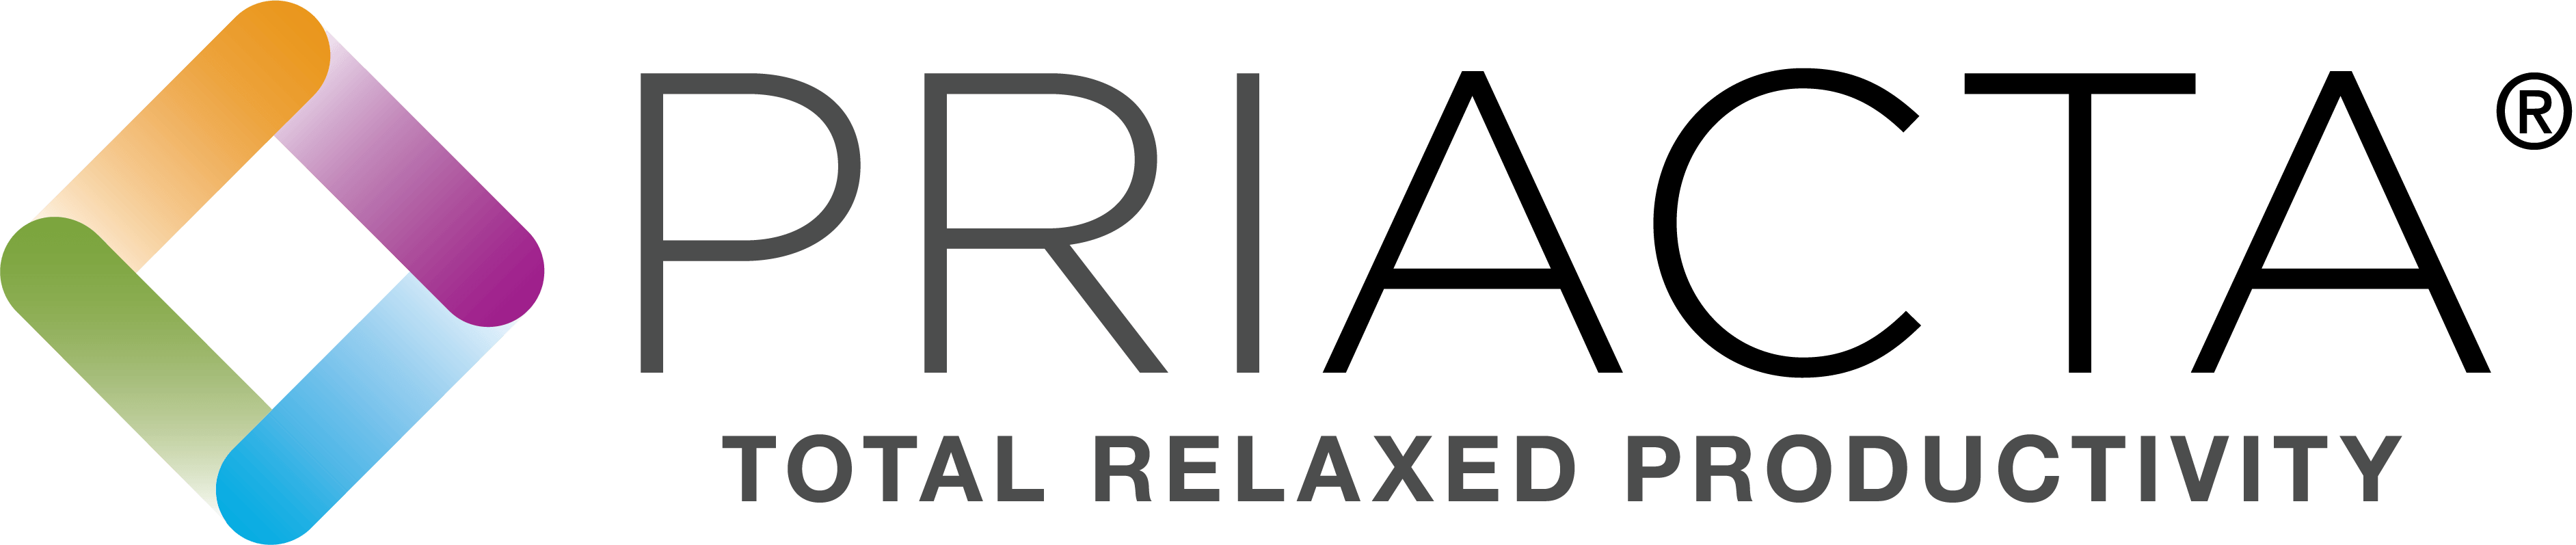 Priacta - Total Relaxed Productivity